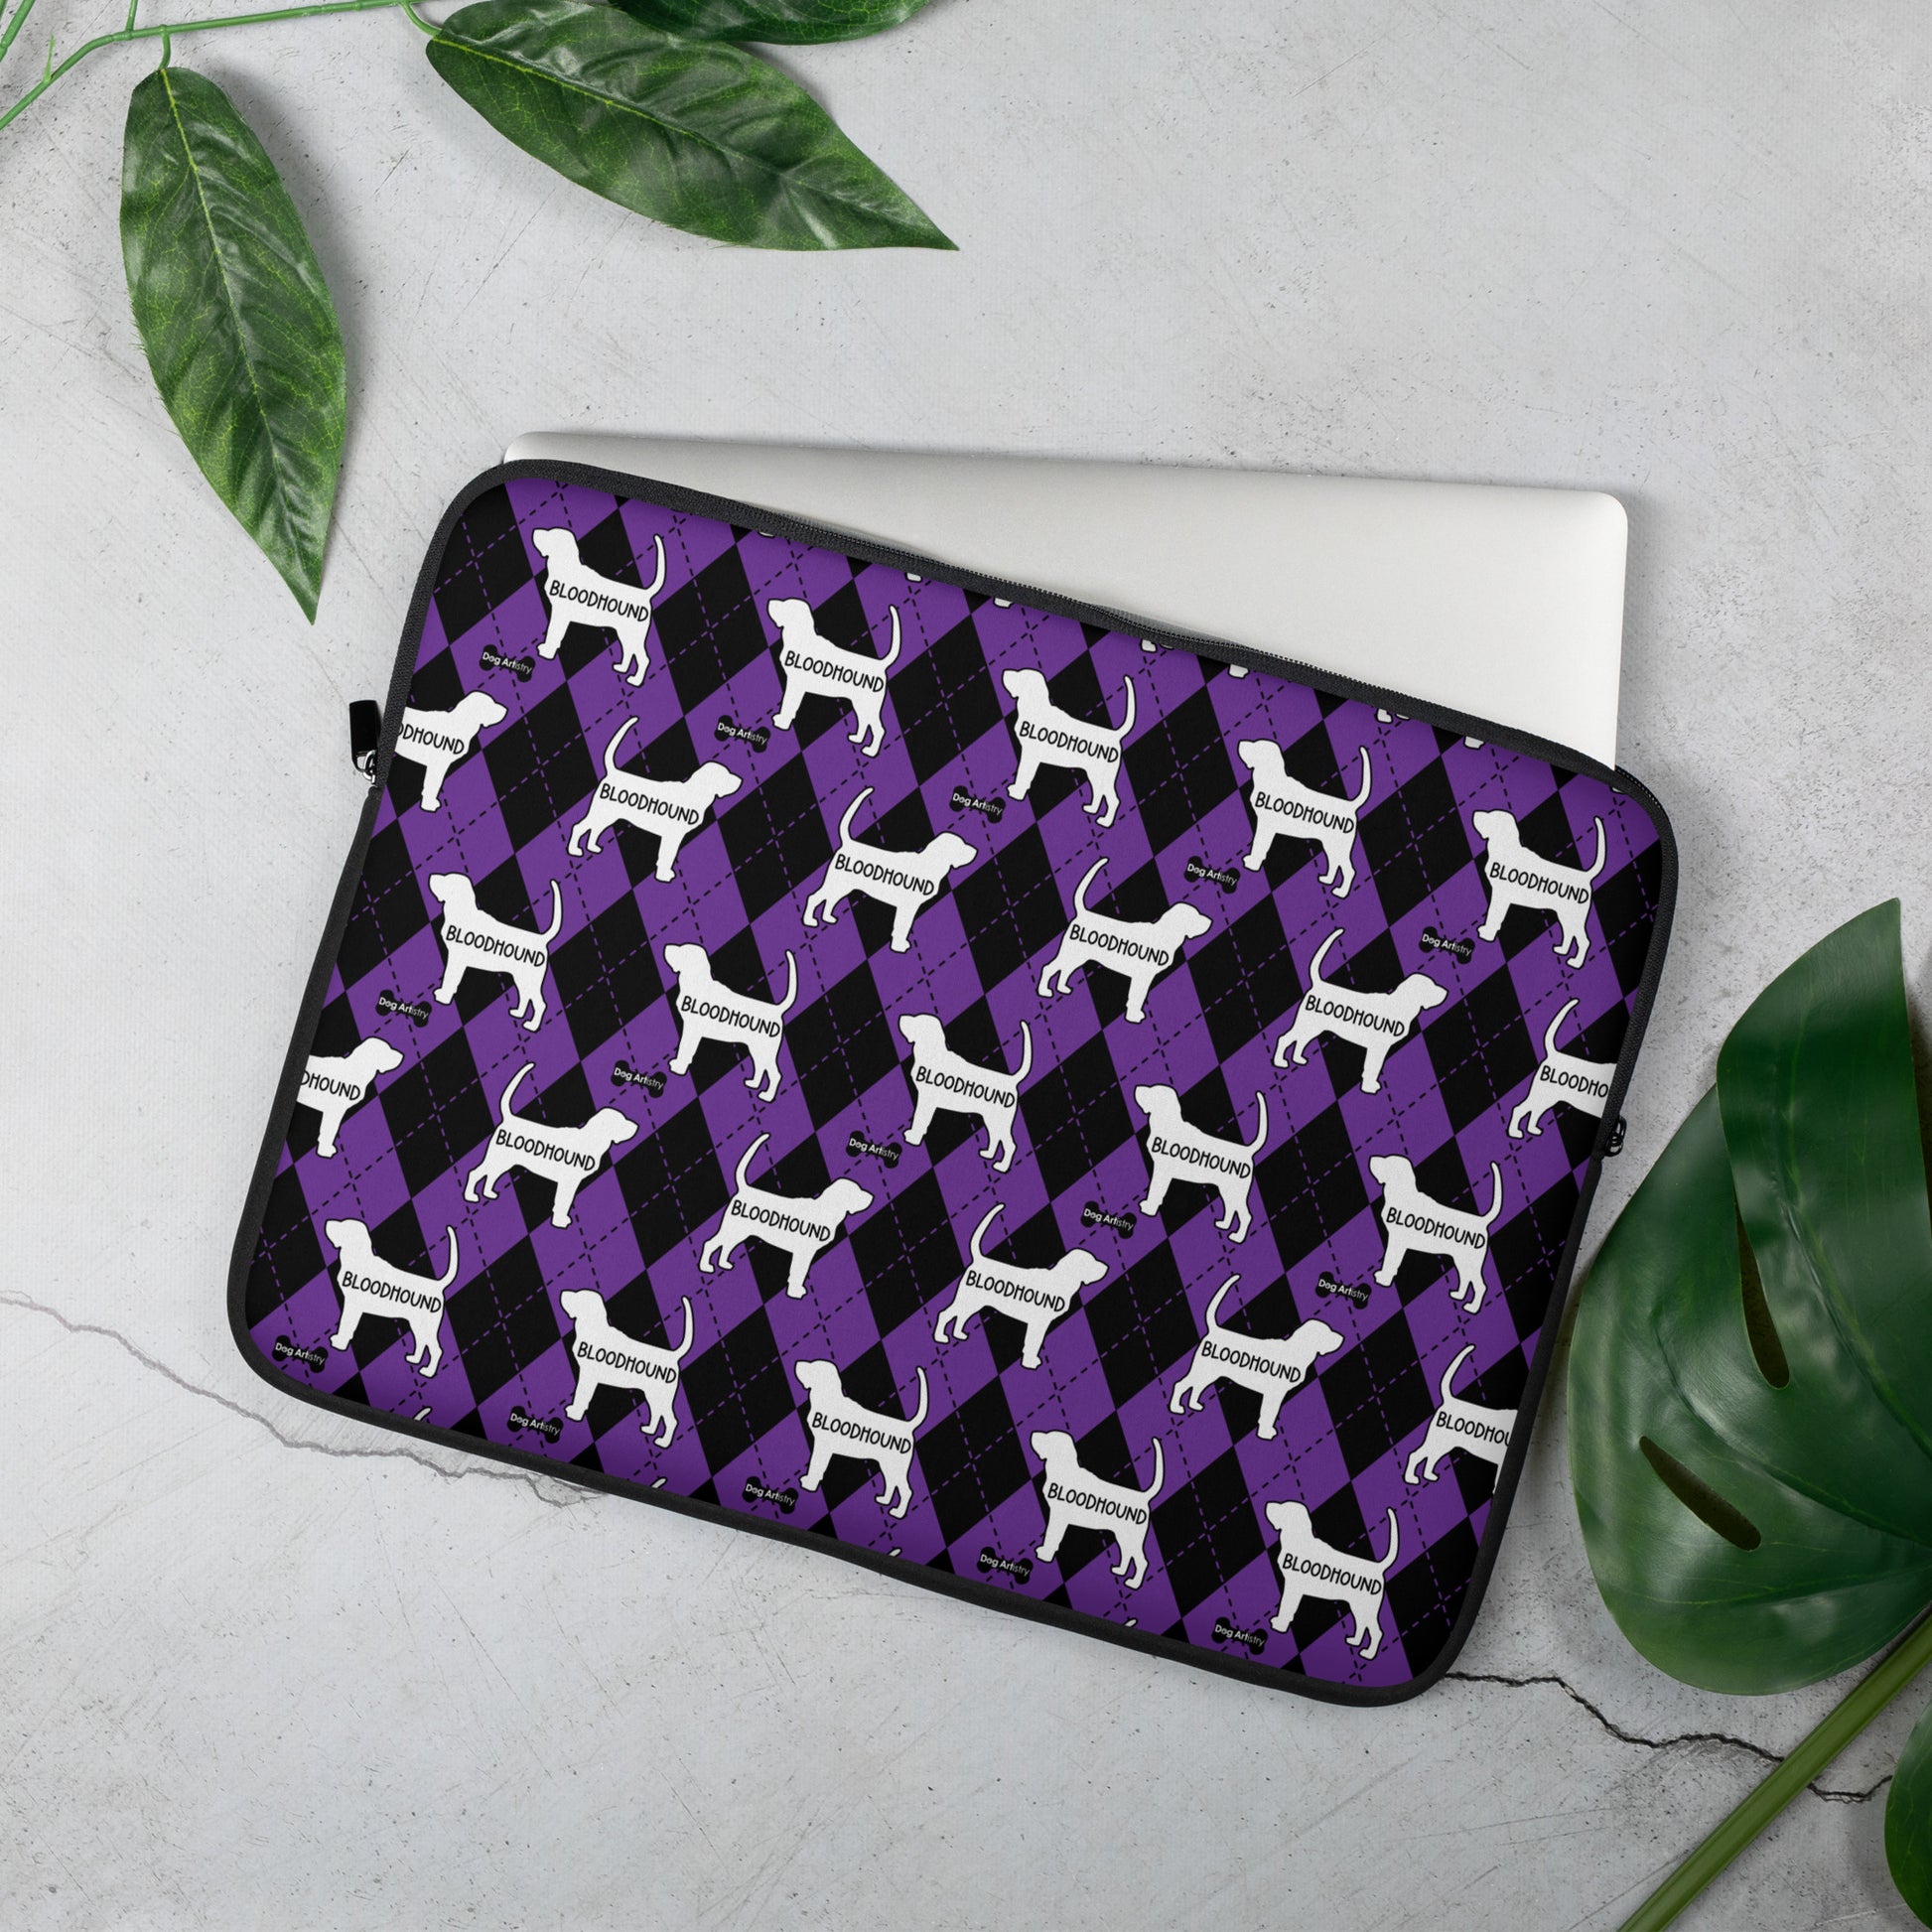 Bloodhound purple and black argyle laptop sleeve by Dog Artistry